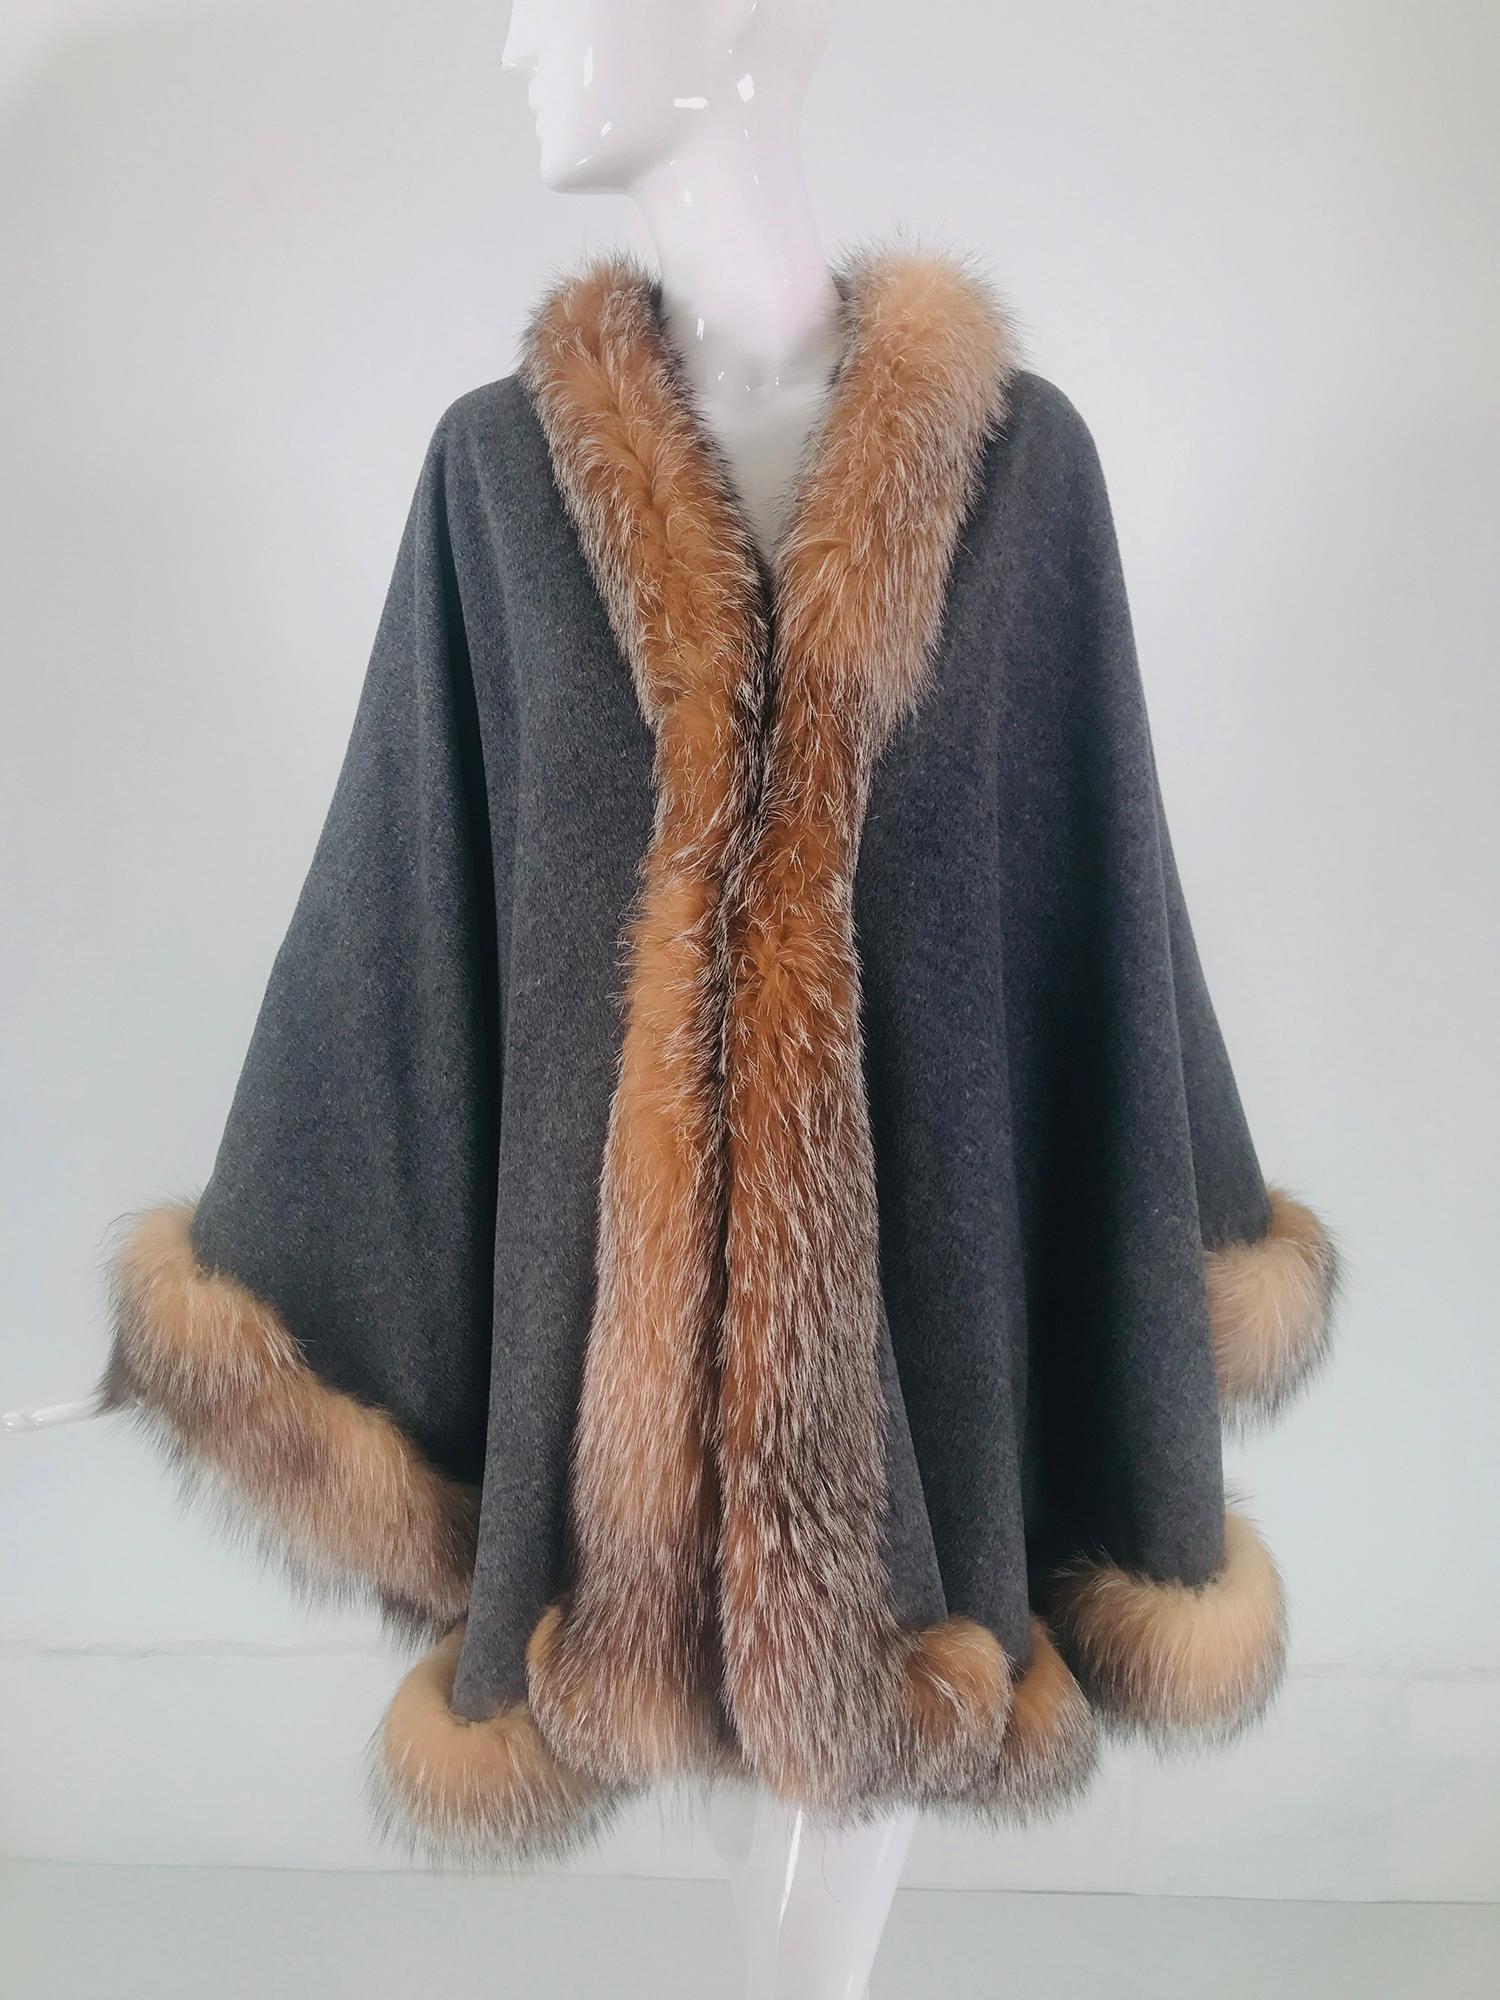 Sprung Freres Paris Red Fox Wool/Cashmere Reversible Cape Grey/Camel Tan OS 5